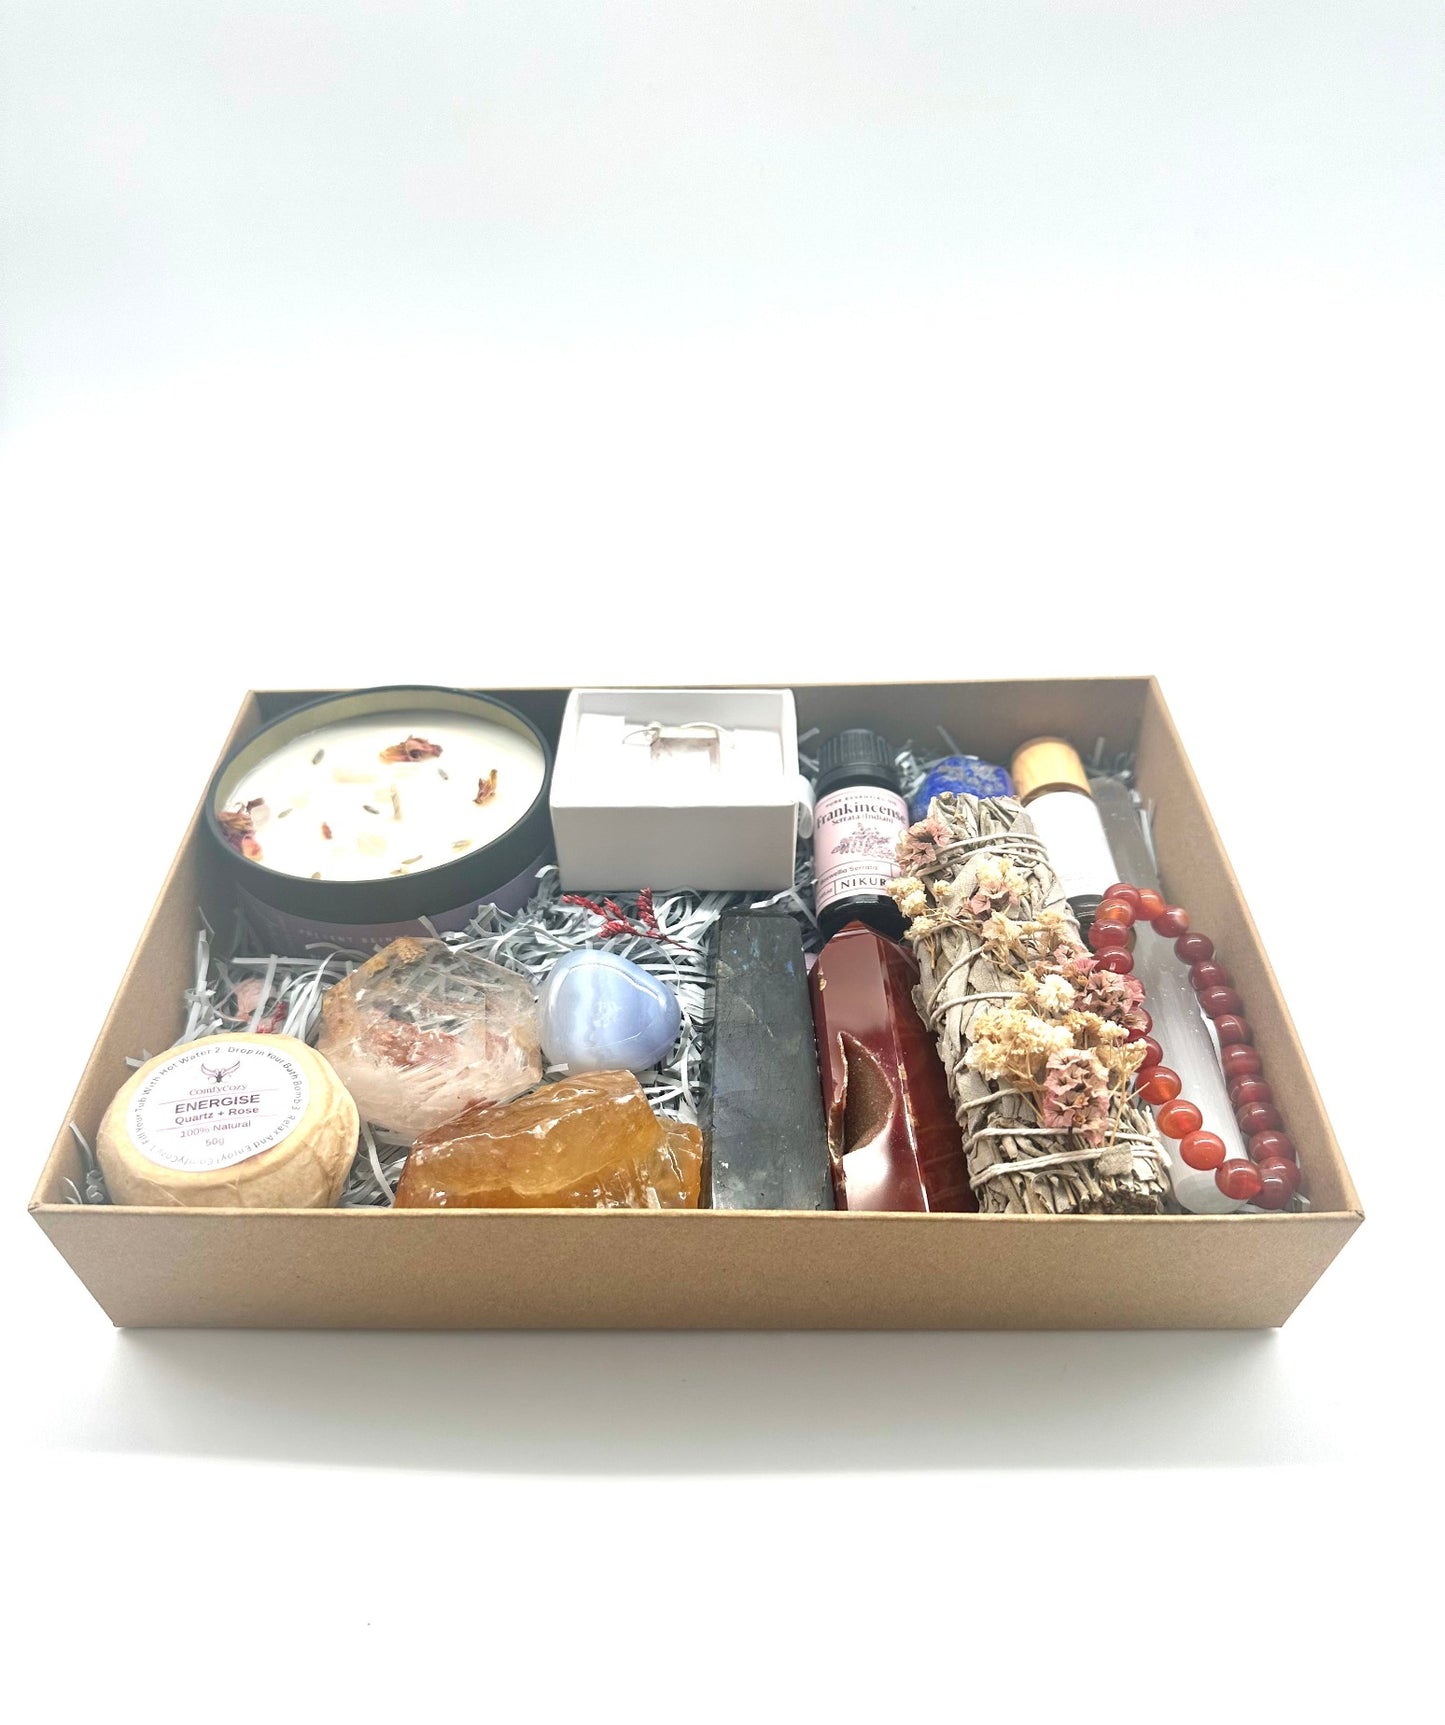 Energize & Happiness Crystal Box